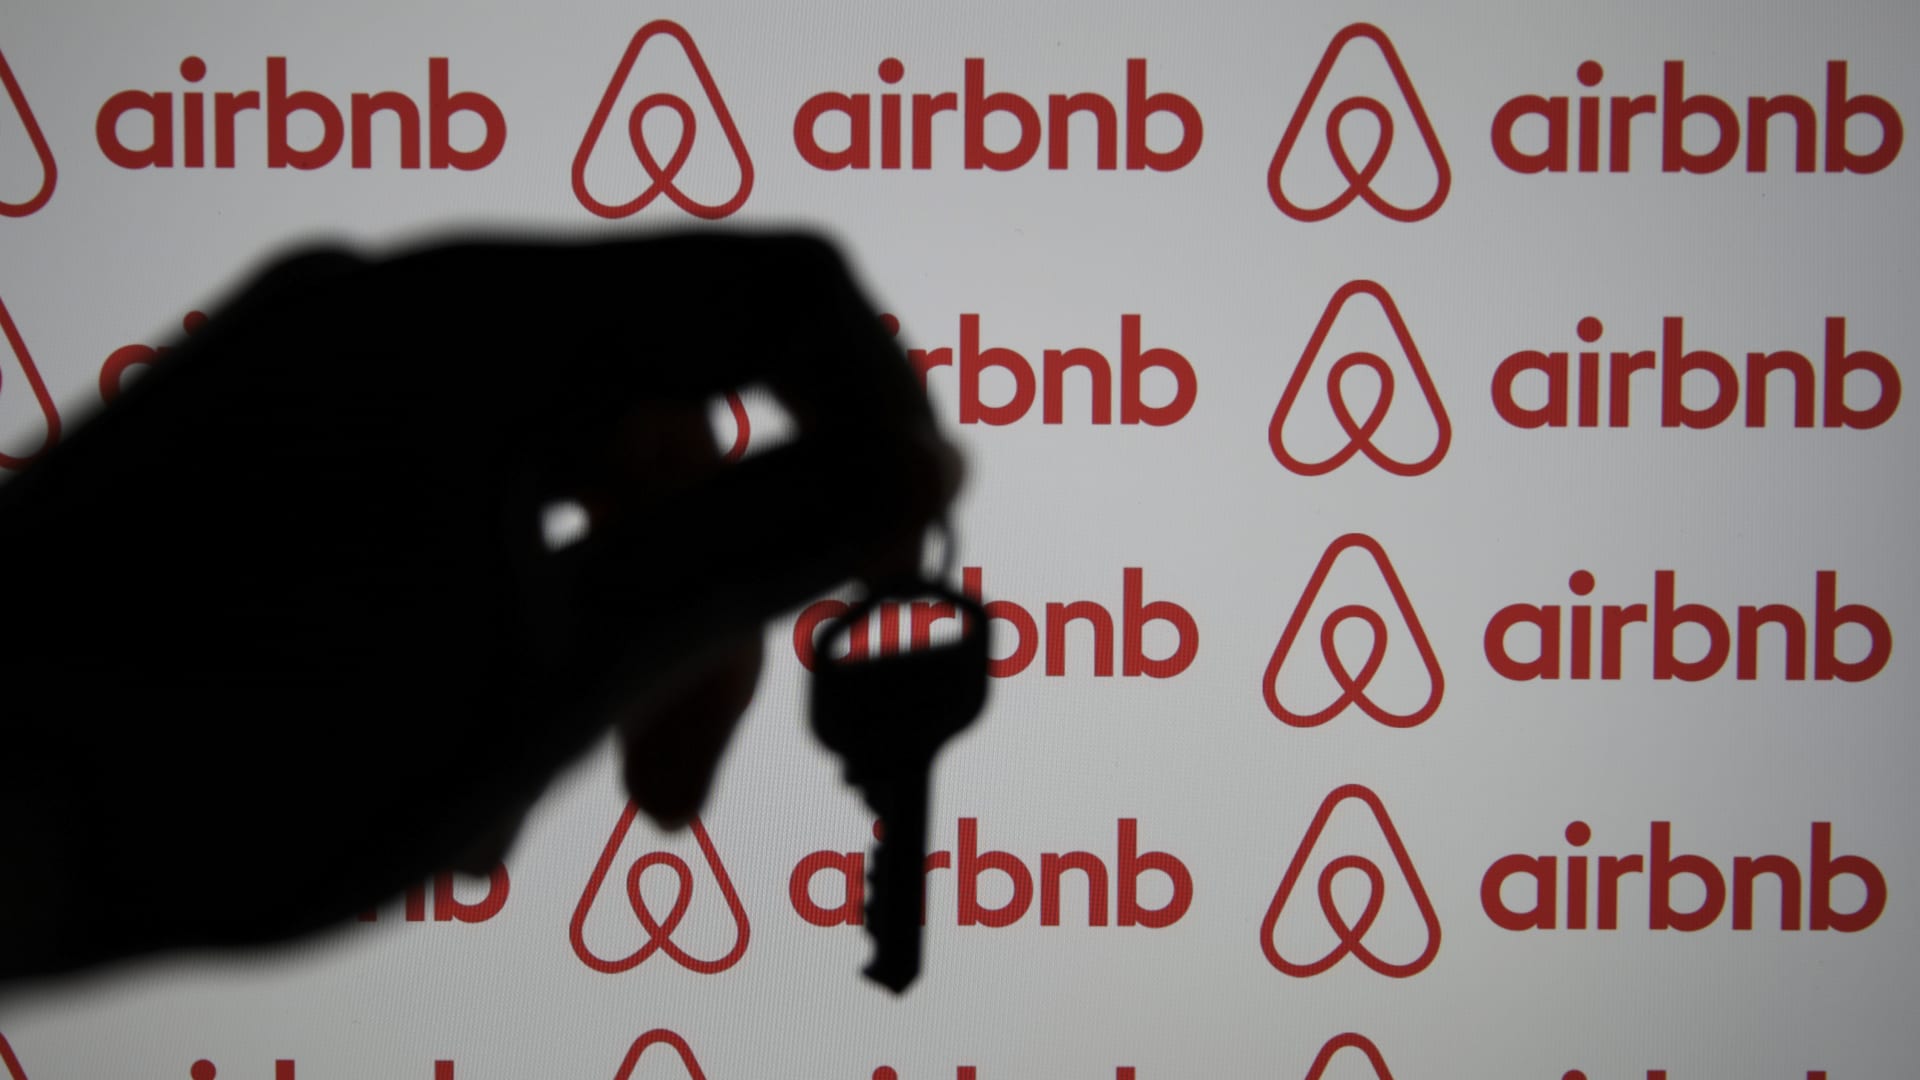 Airbnb's new chief business officer shares his top priorities for hosts and travelers